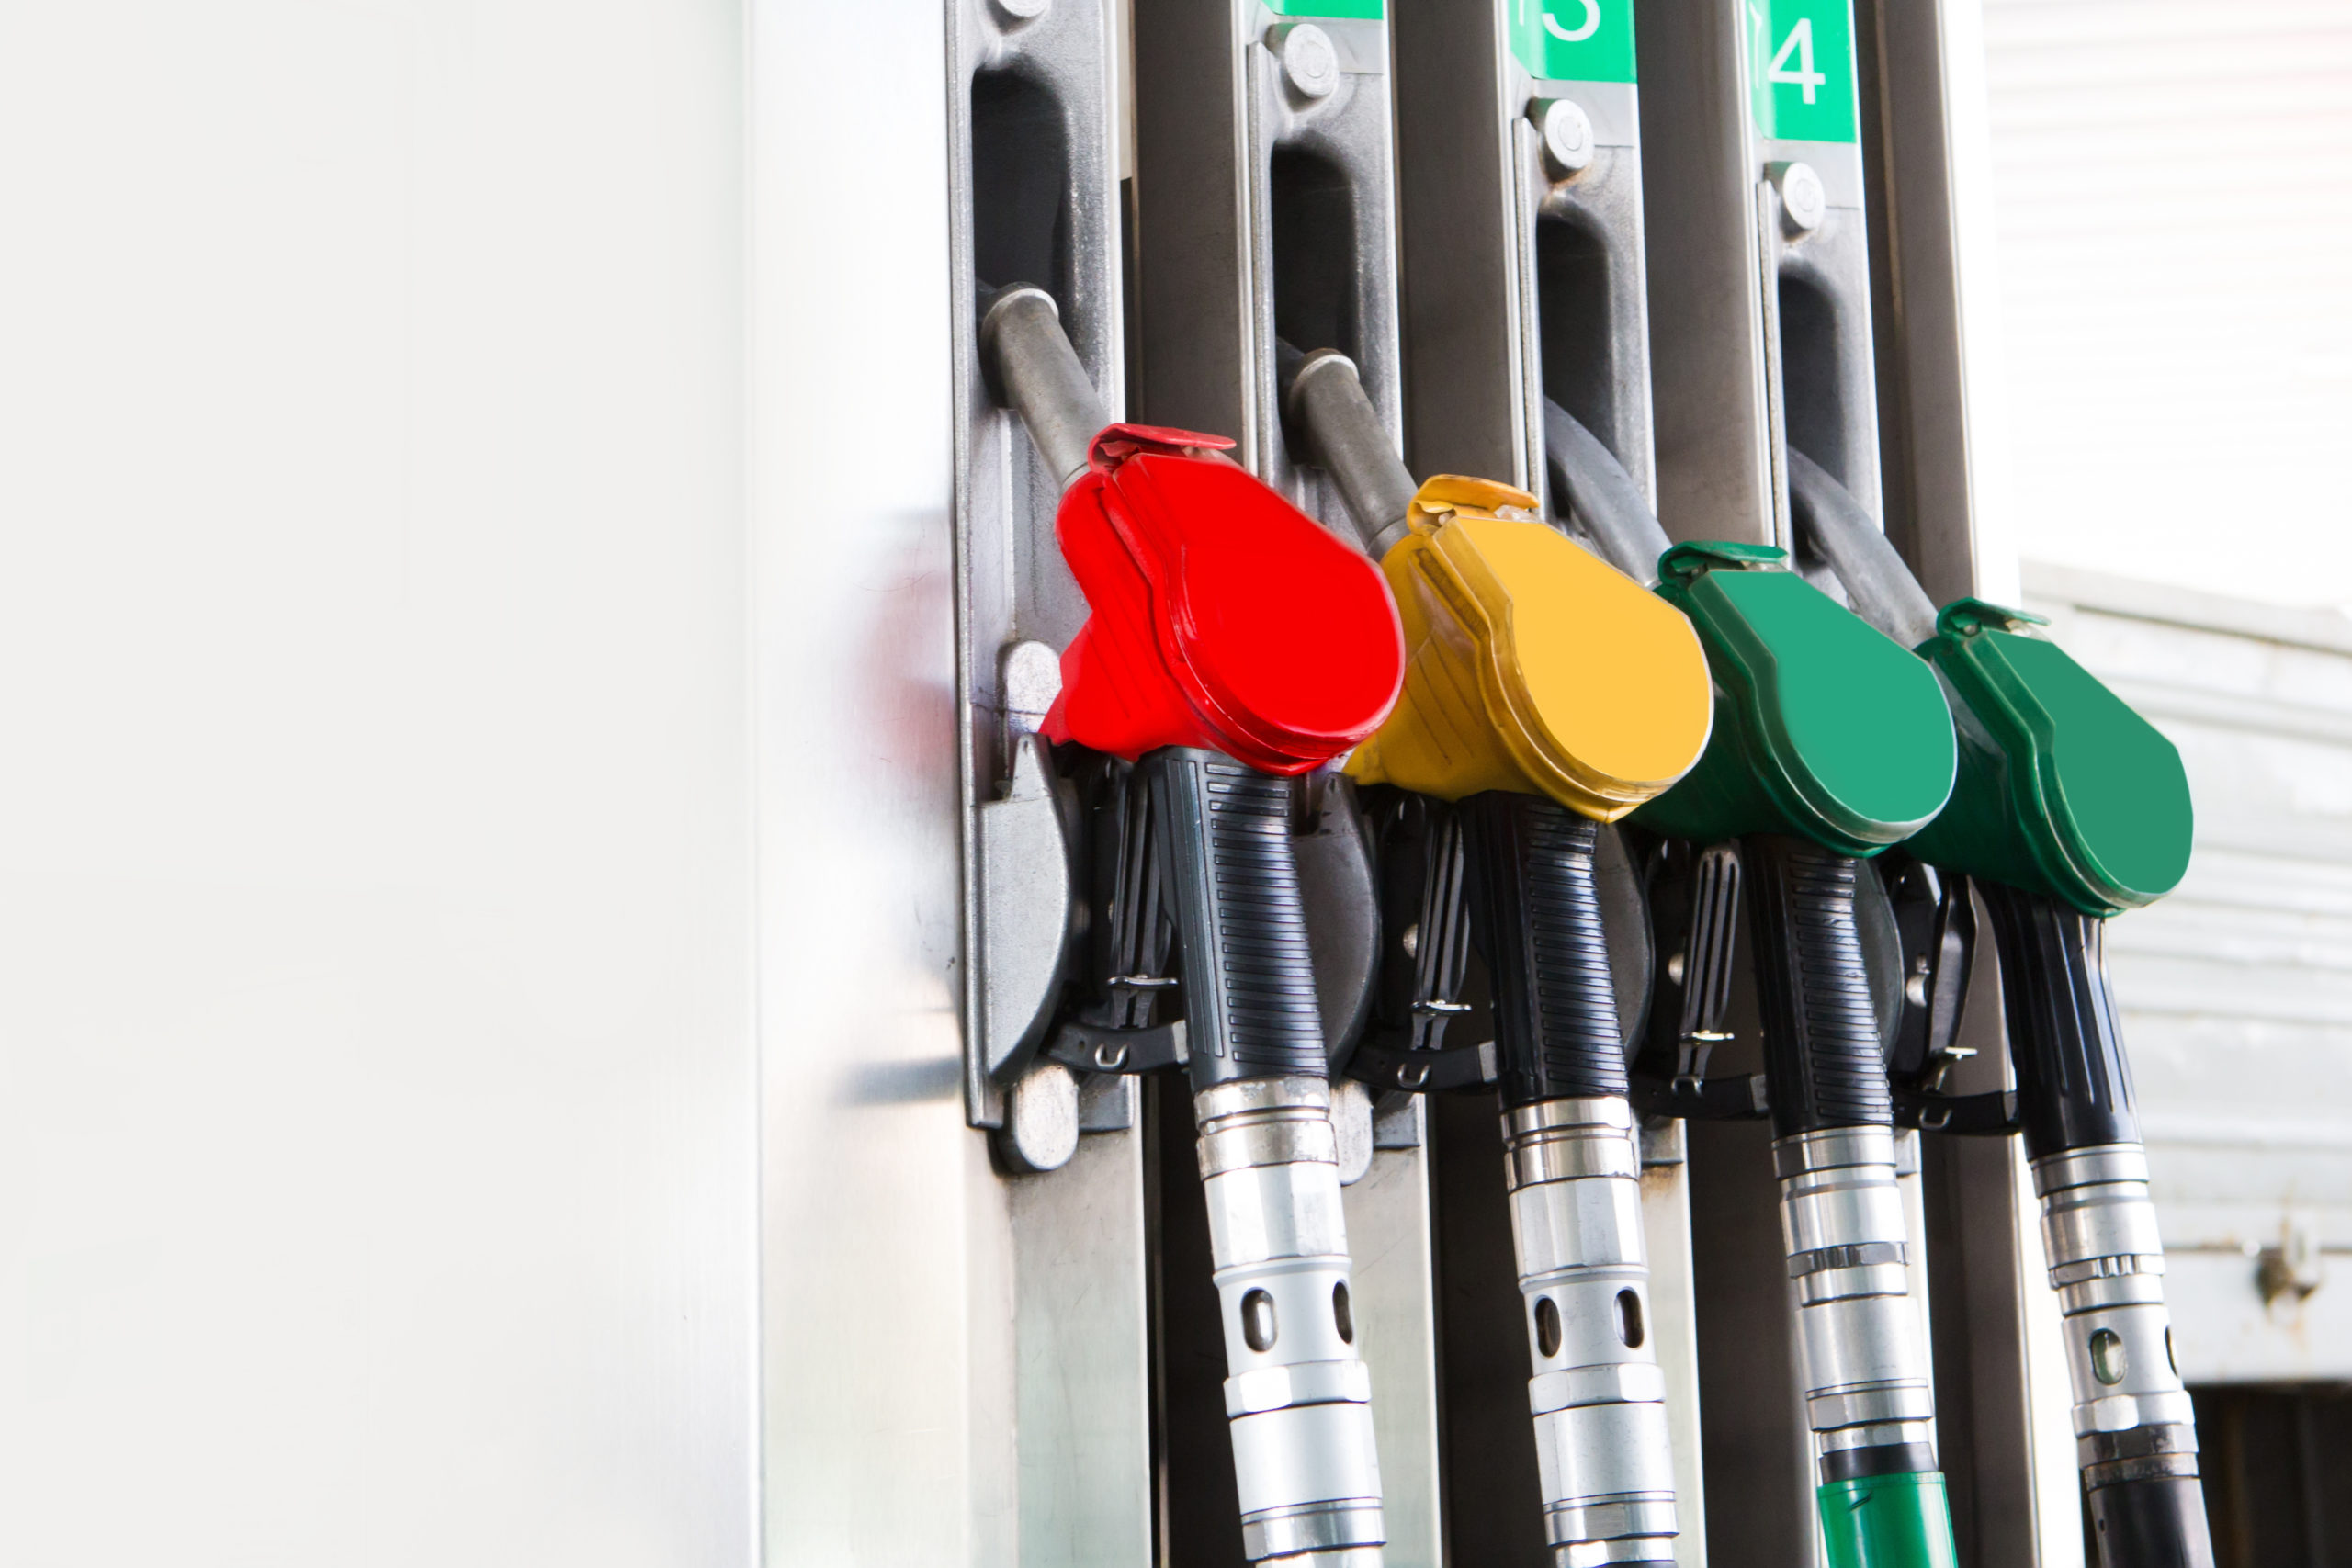 Forecourt crime increases by 13% during Q1 of 2020